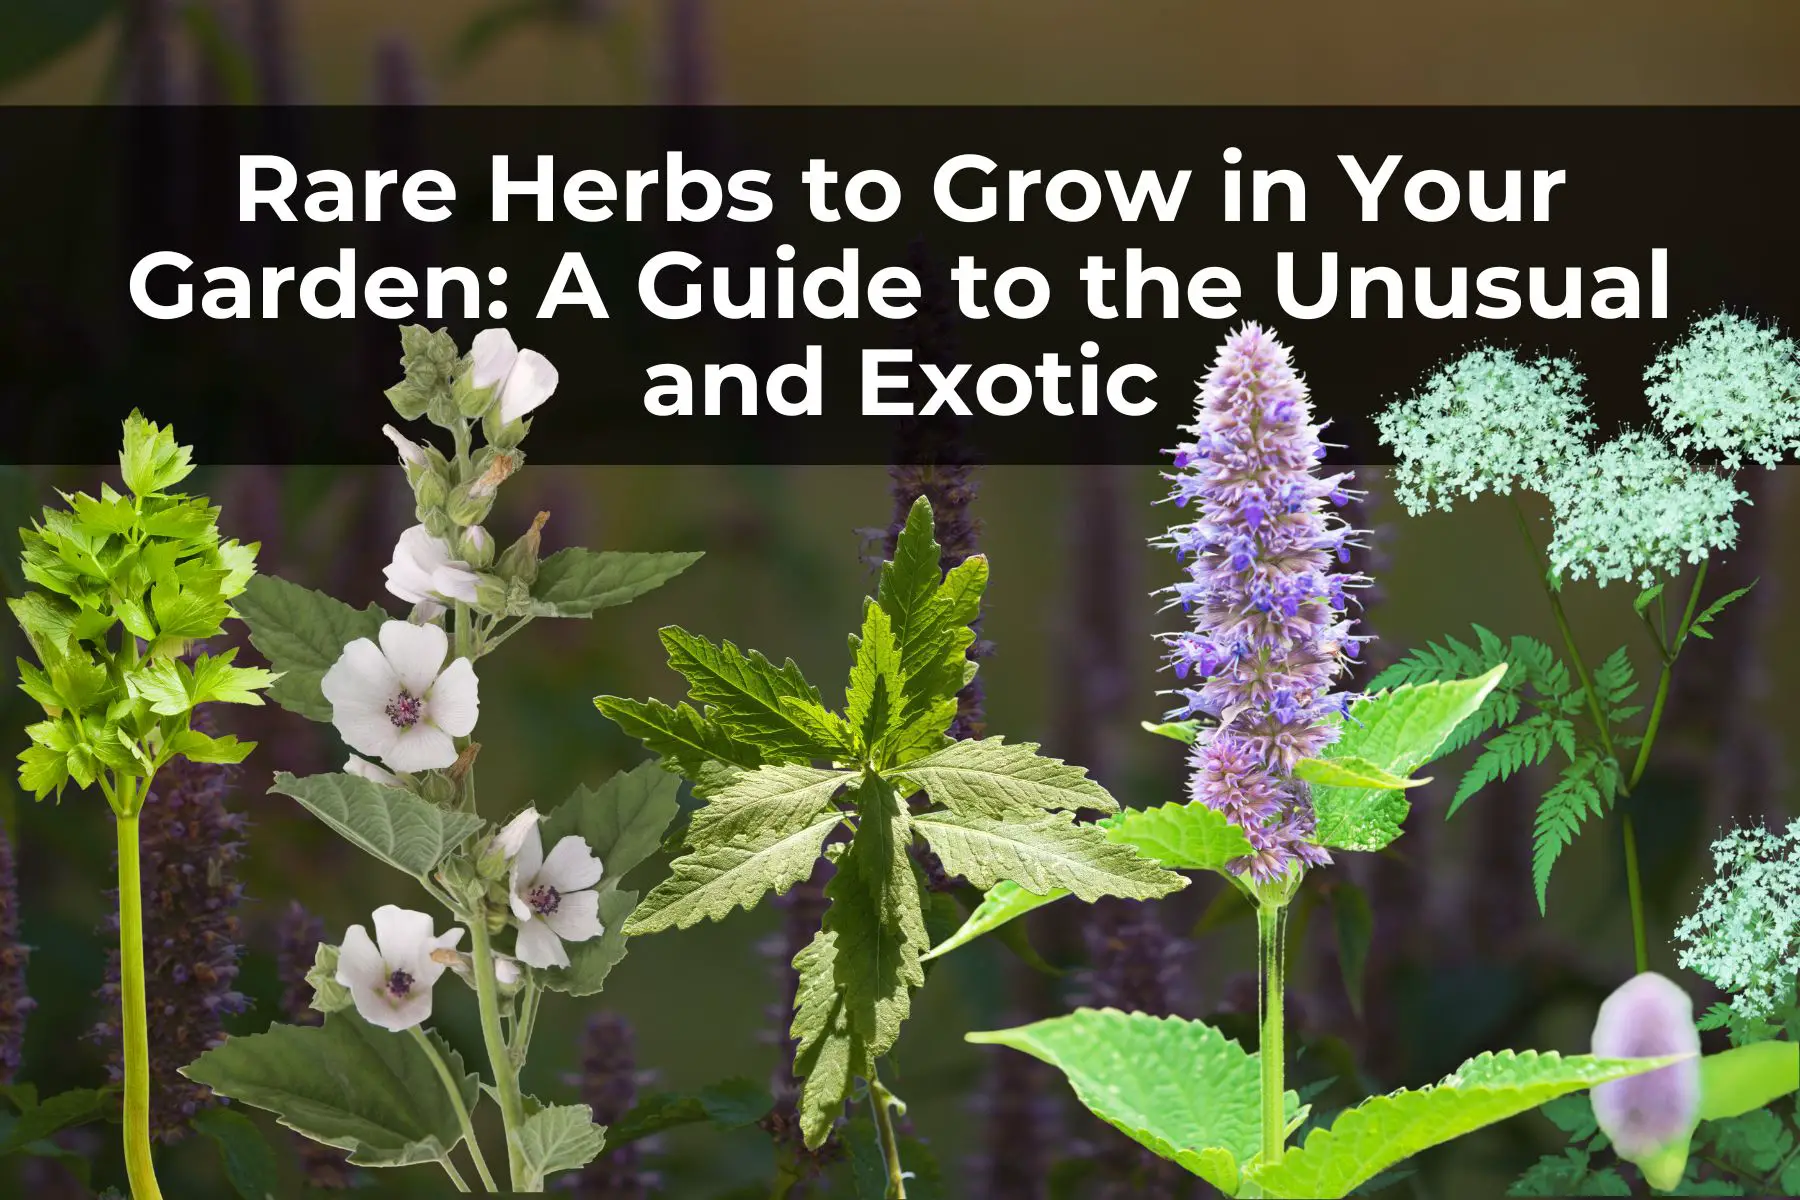 Rare Herbs to Grow in Your Garden: A Guide to the Unusual and Exotic